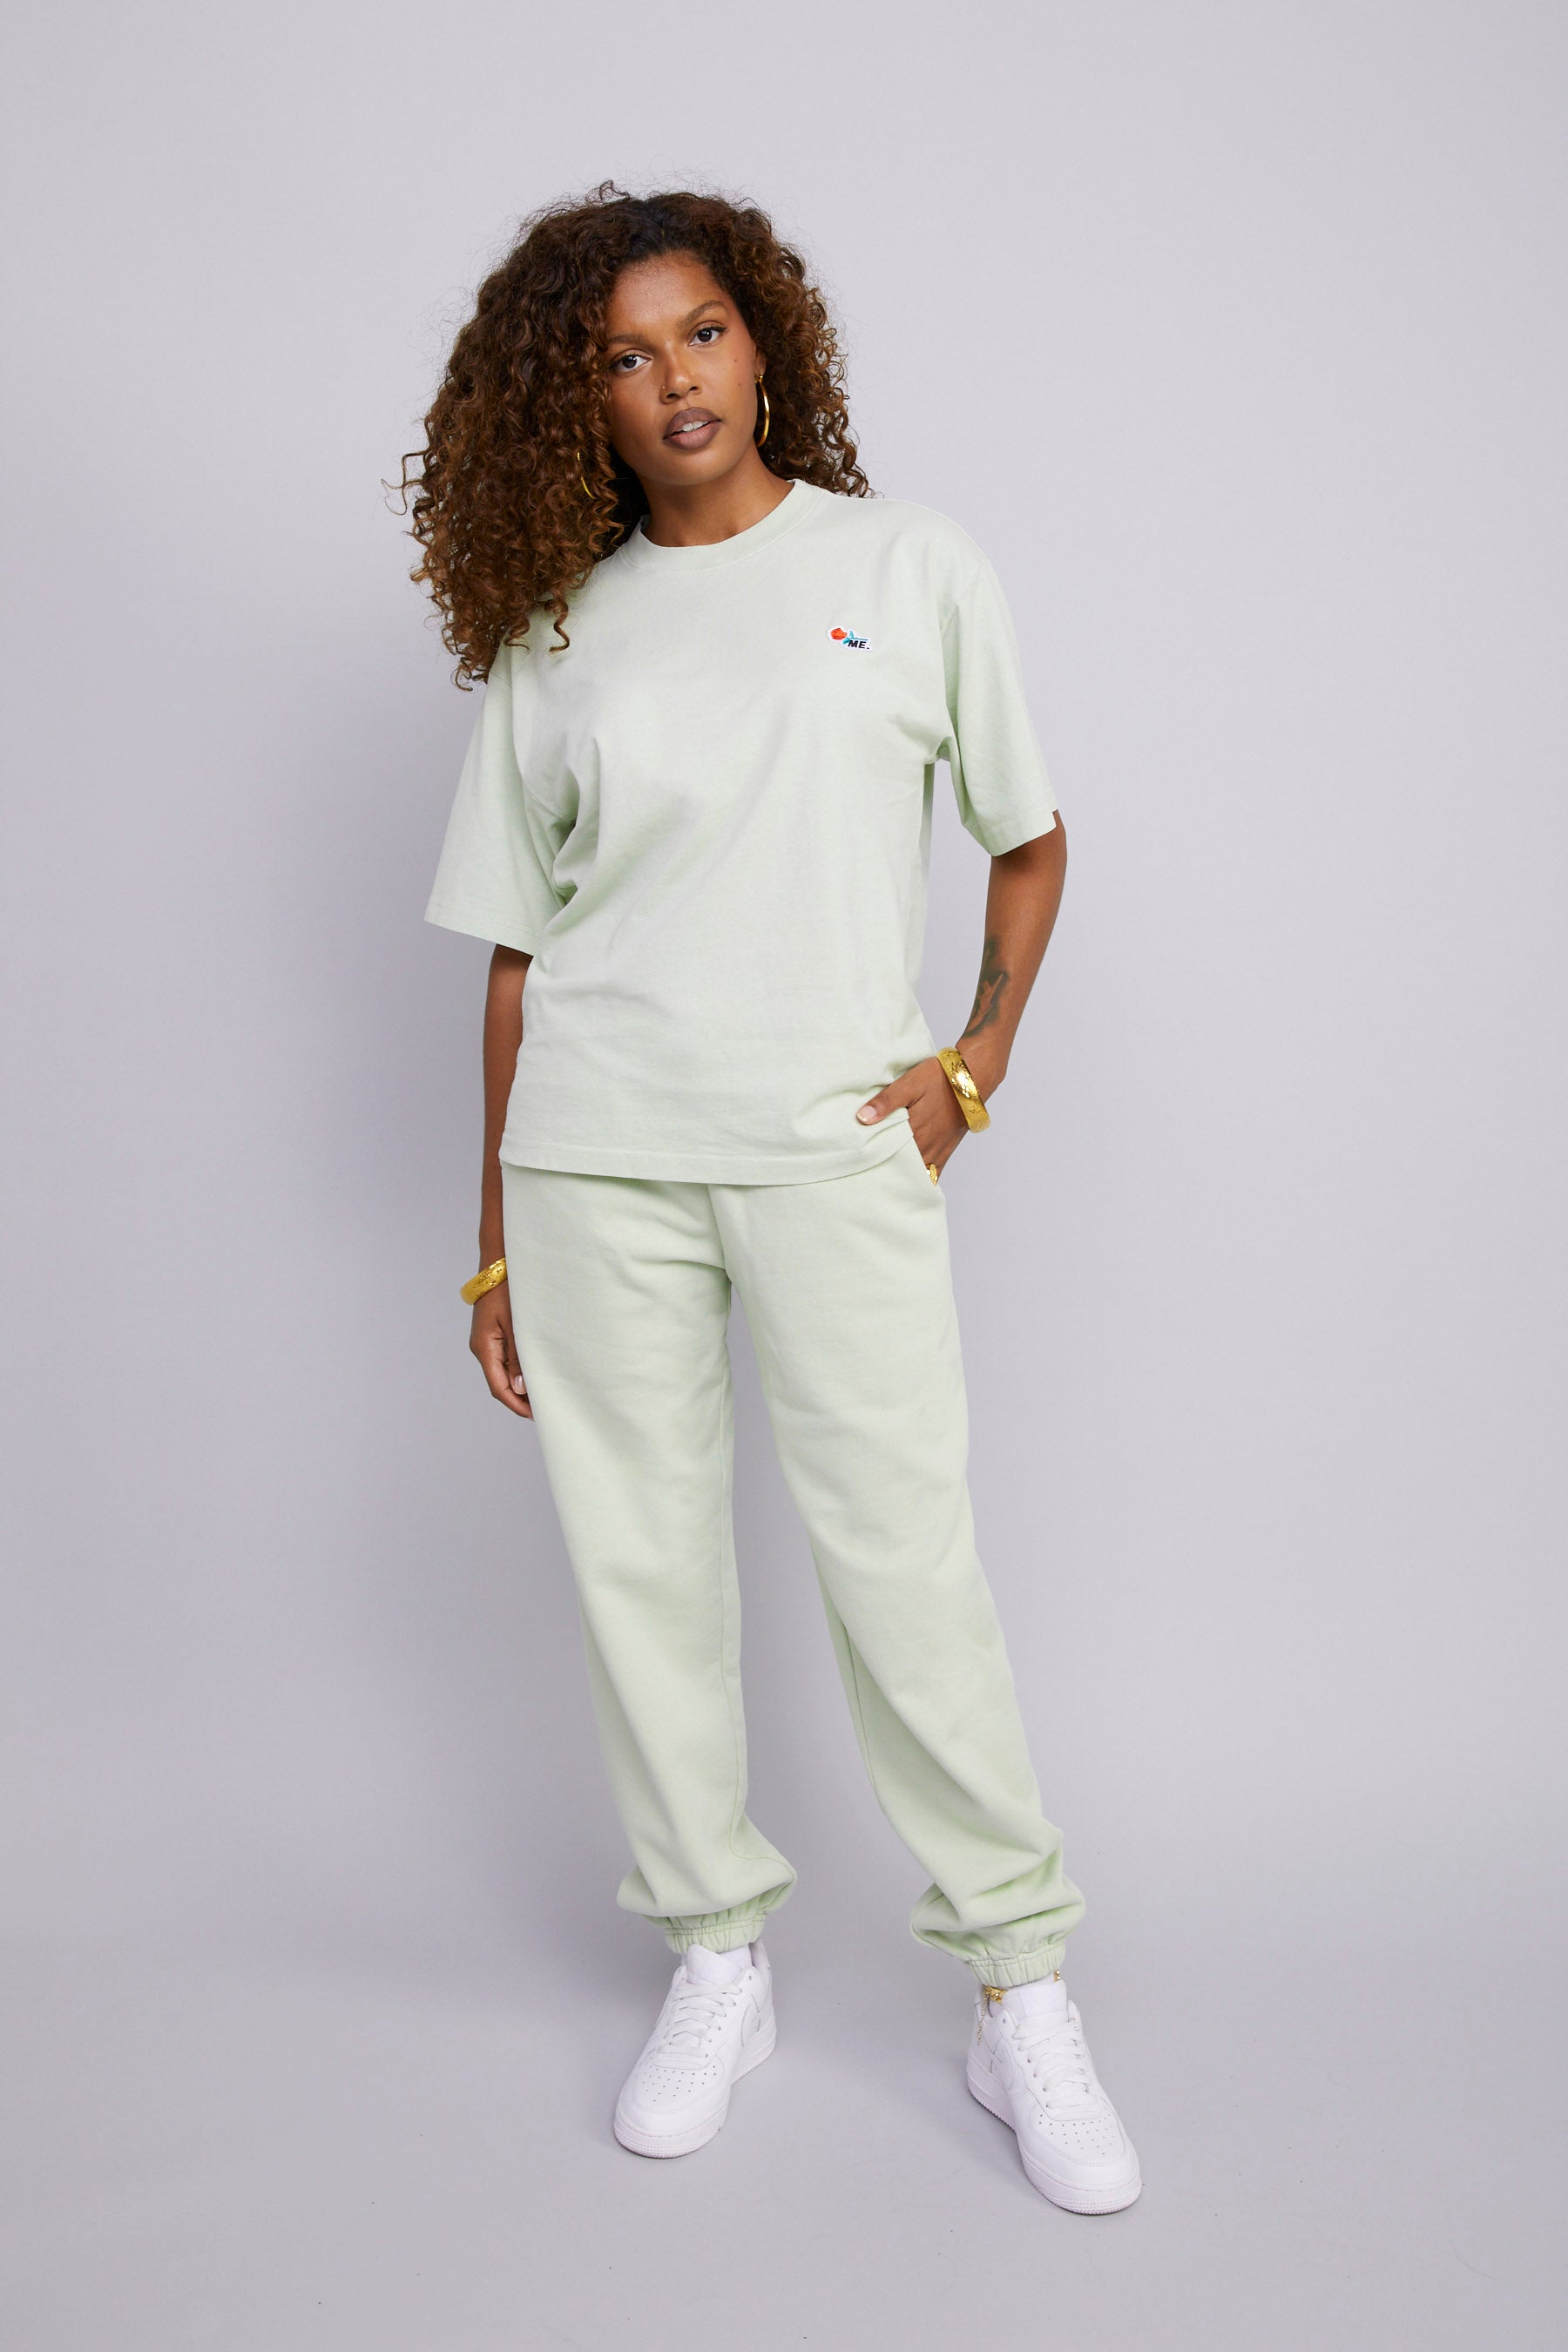 Melody Ehsani Gender Inclusive Heavy Fleece Sweatpants in Sand Verbena at Nordstrom, Size X-Large